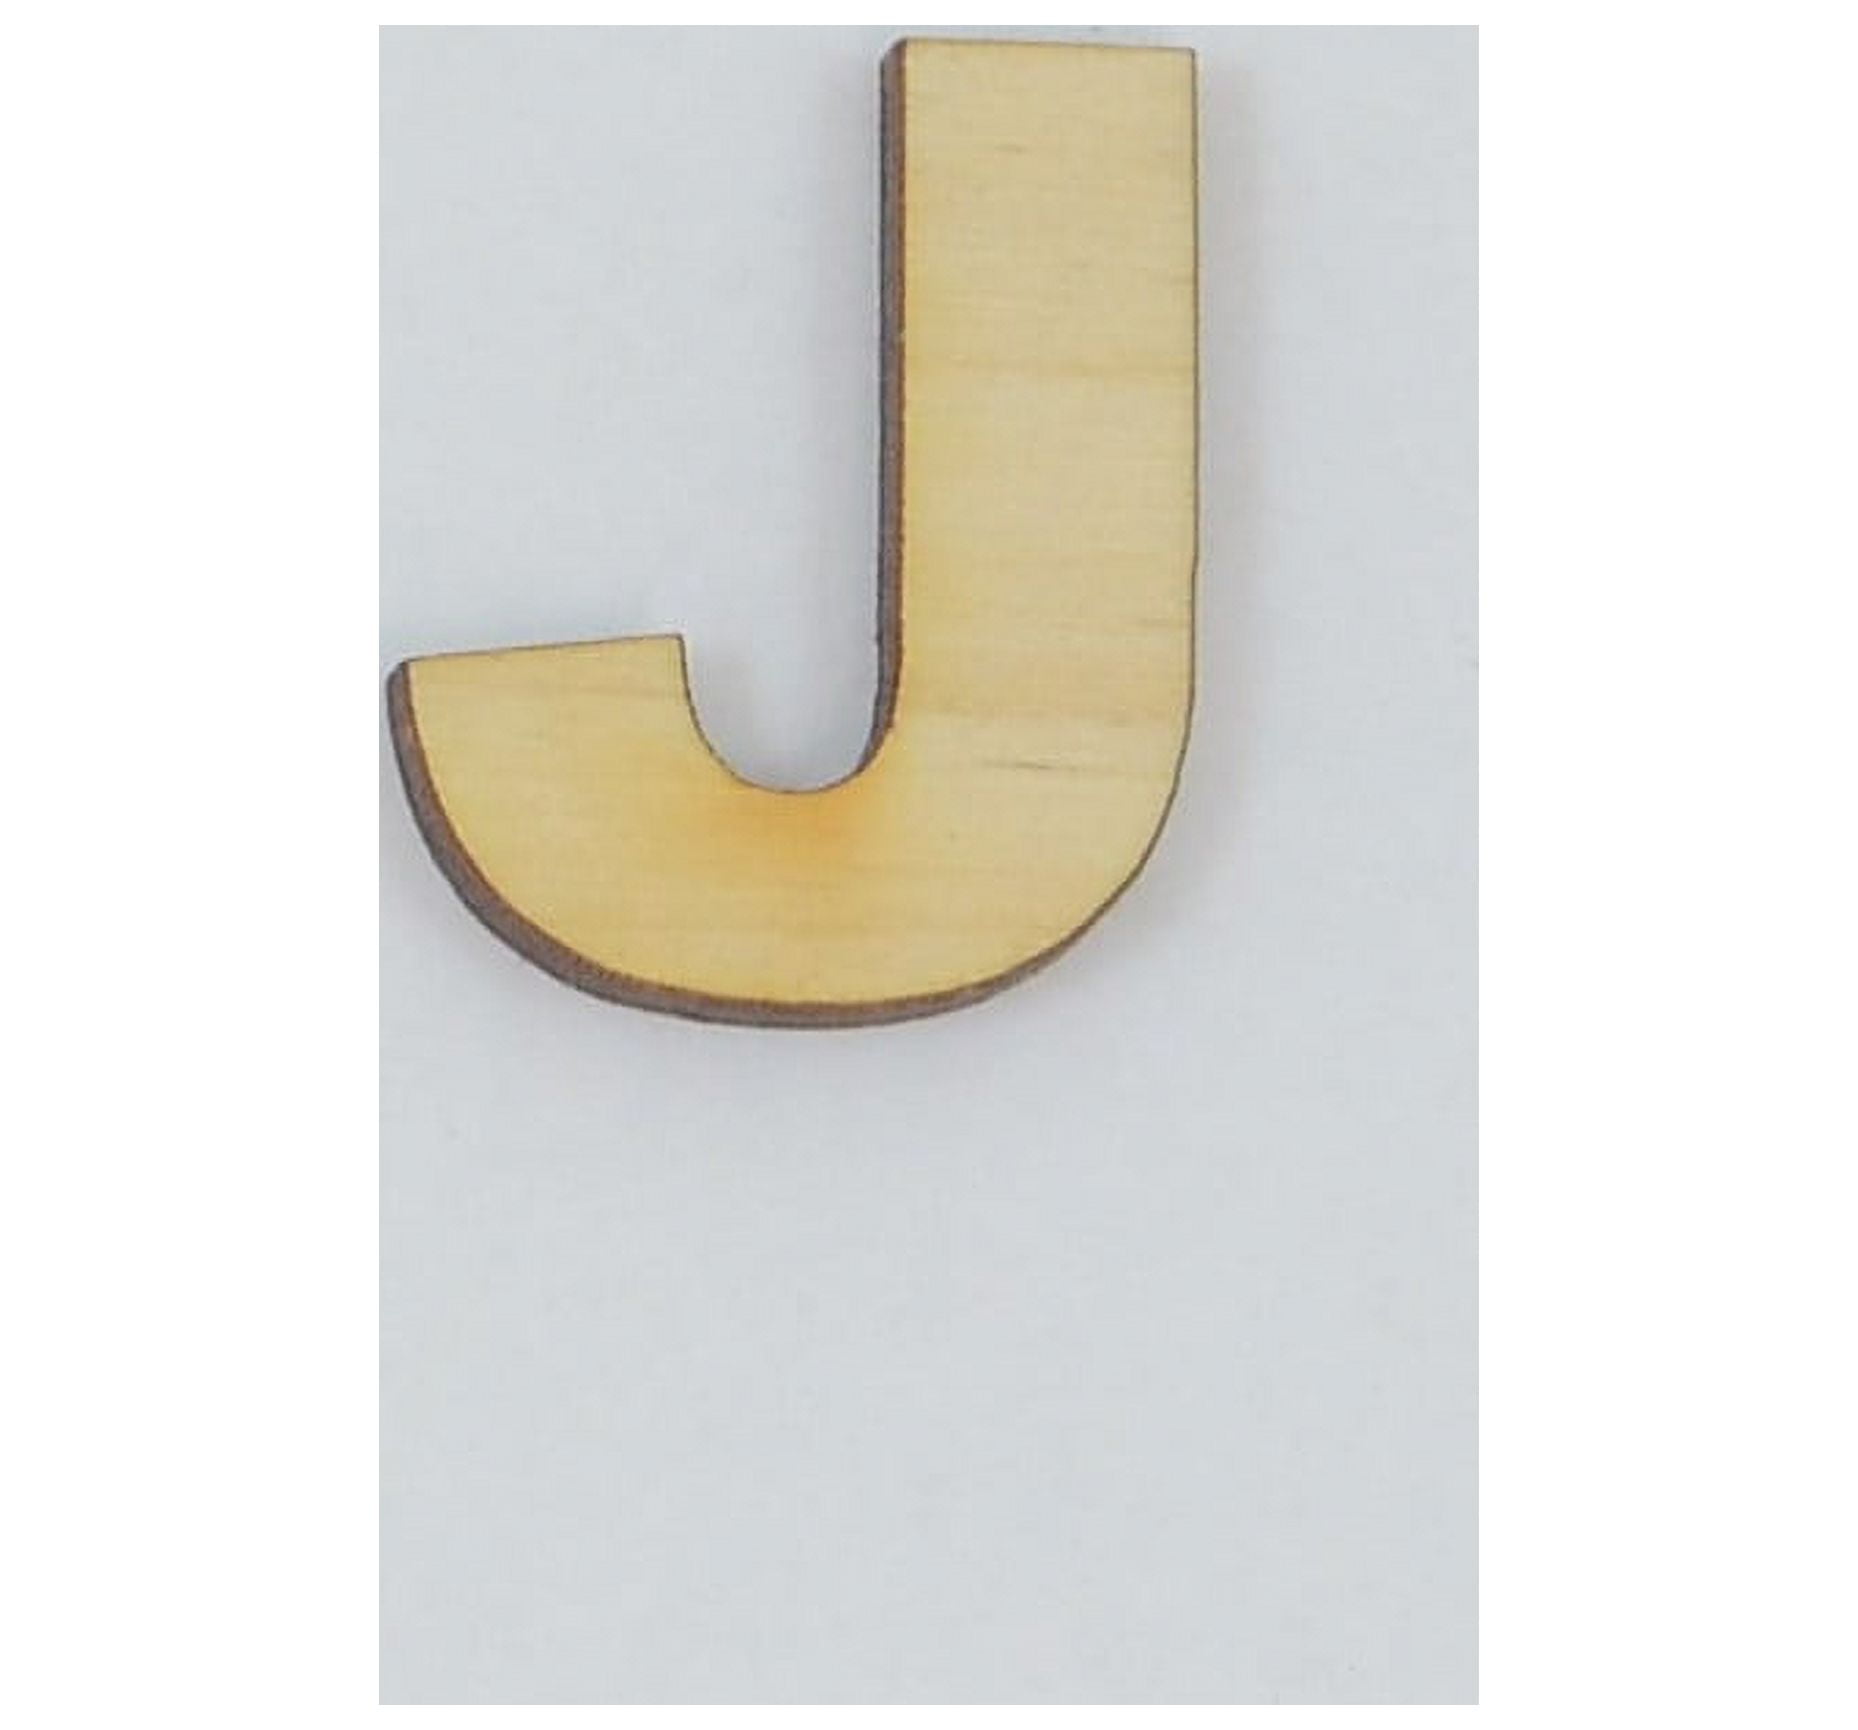 1 Pc, 6 Inch X 1/4 Inch Thick Wood Letters O In The Arial Font For